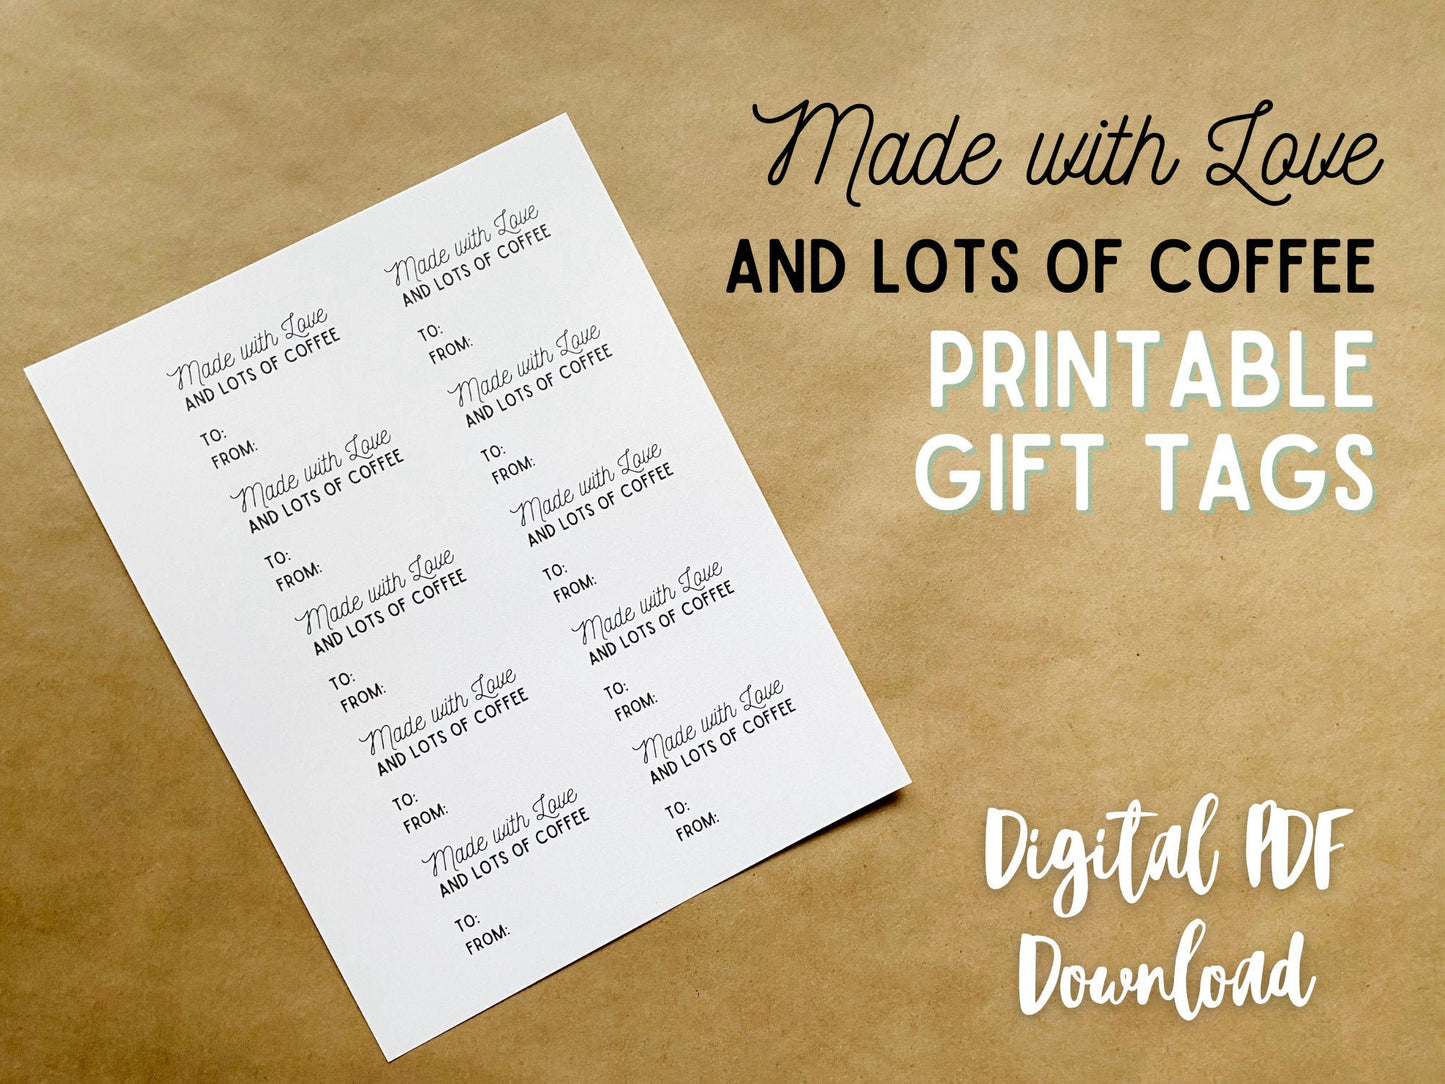 Made with Love & Lots of Coffee Gift Tags